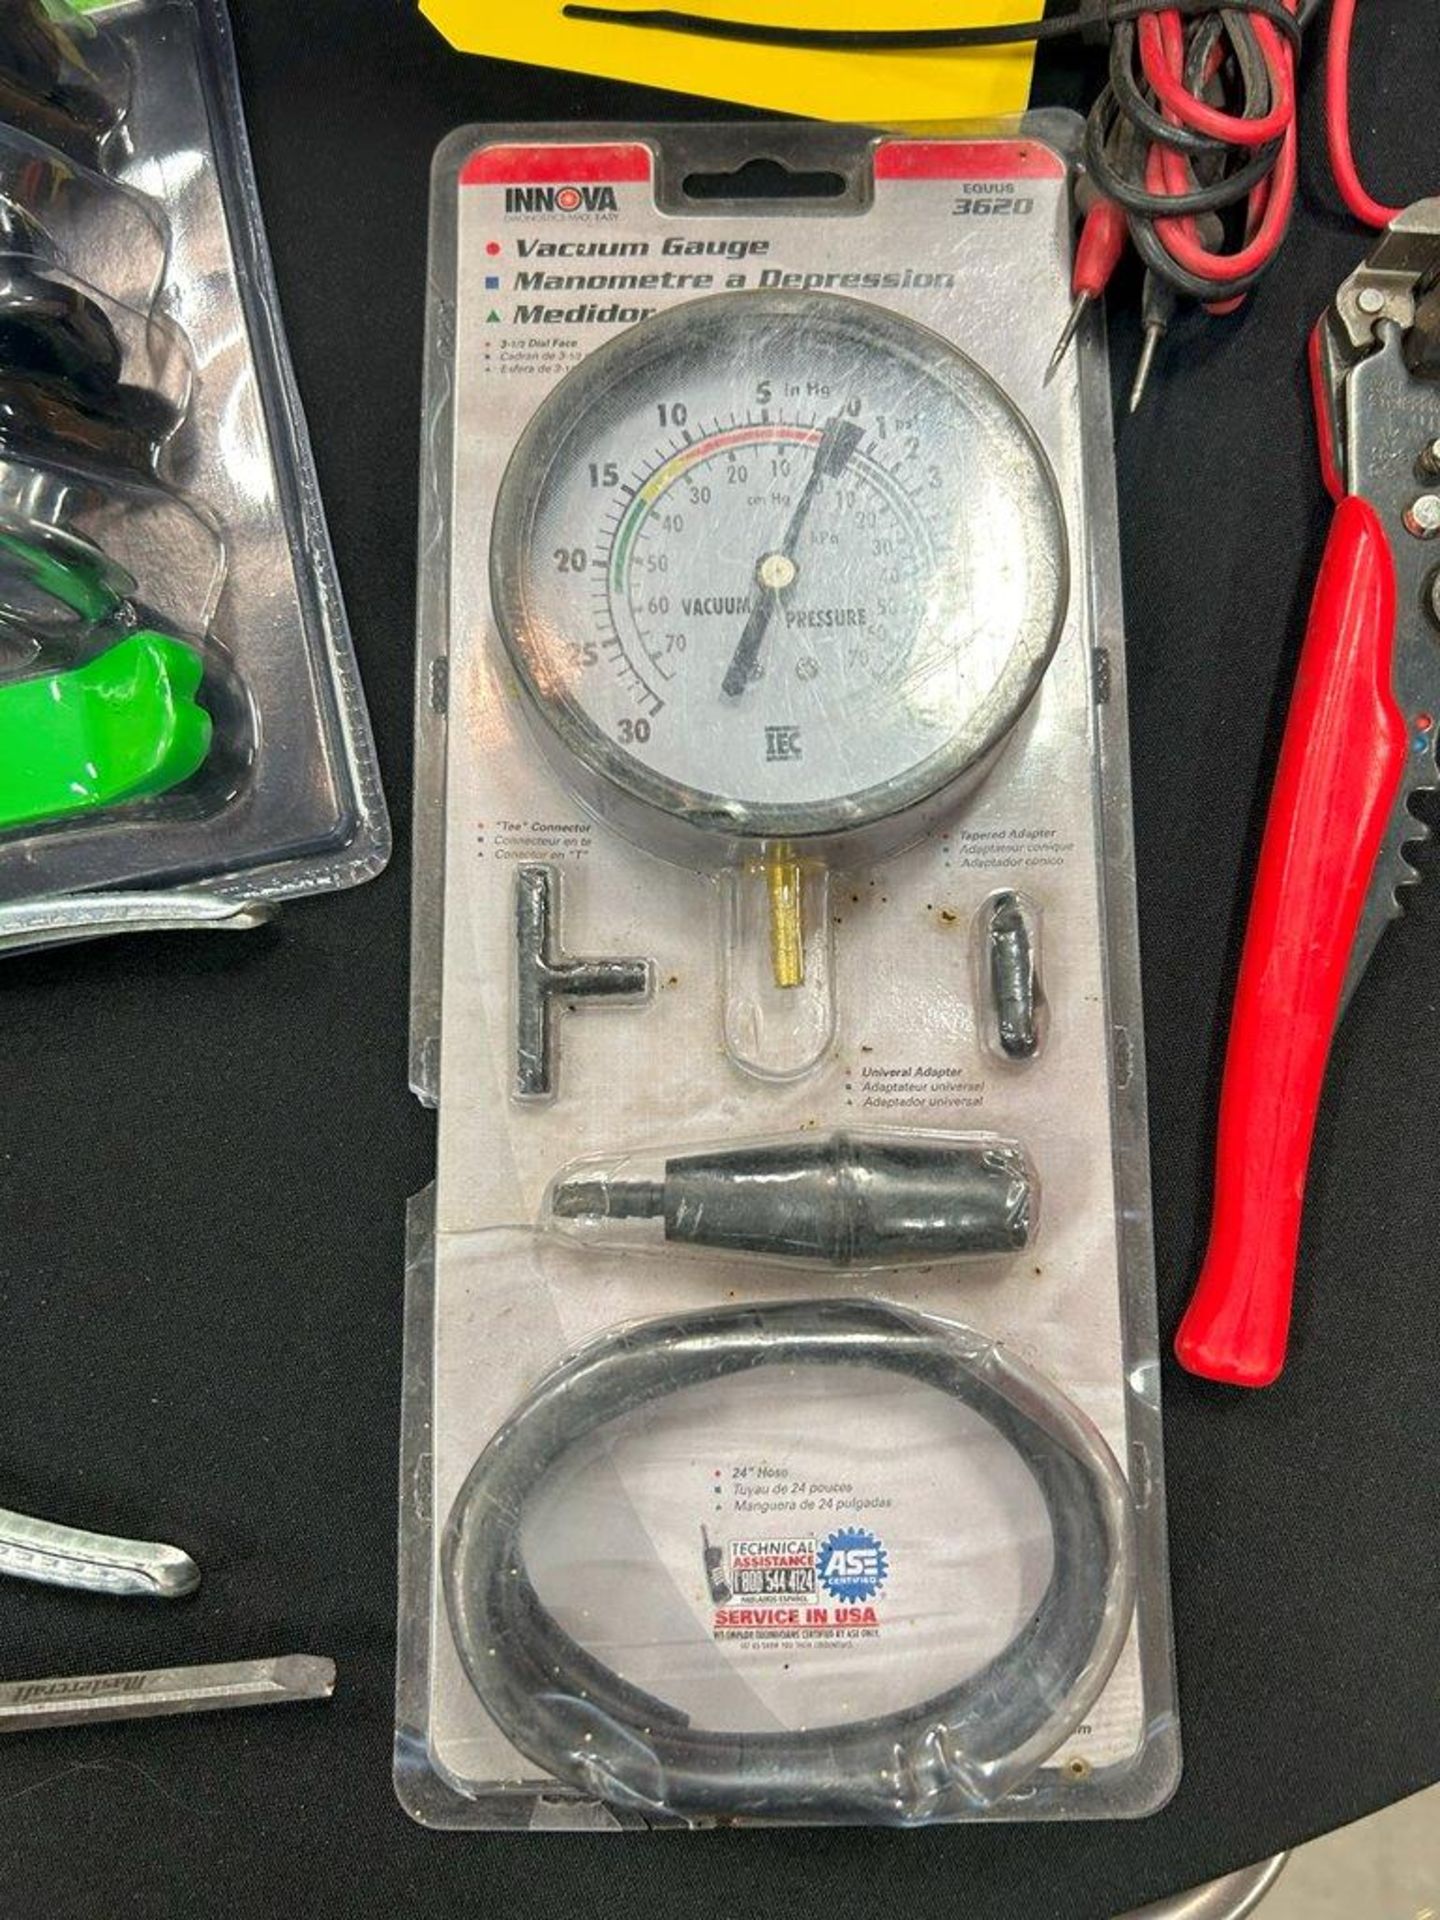 VACUUM GAUGE, 4 PC MAGNETIC TOOL SET, WEATHERSTRIPPING ETC. - A35 - Image 4 of 11